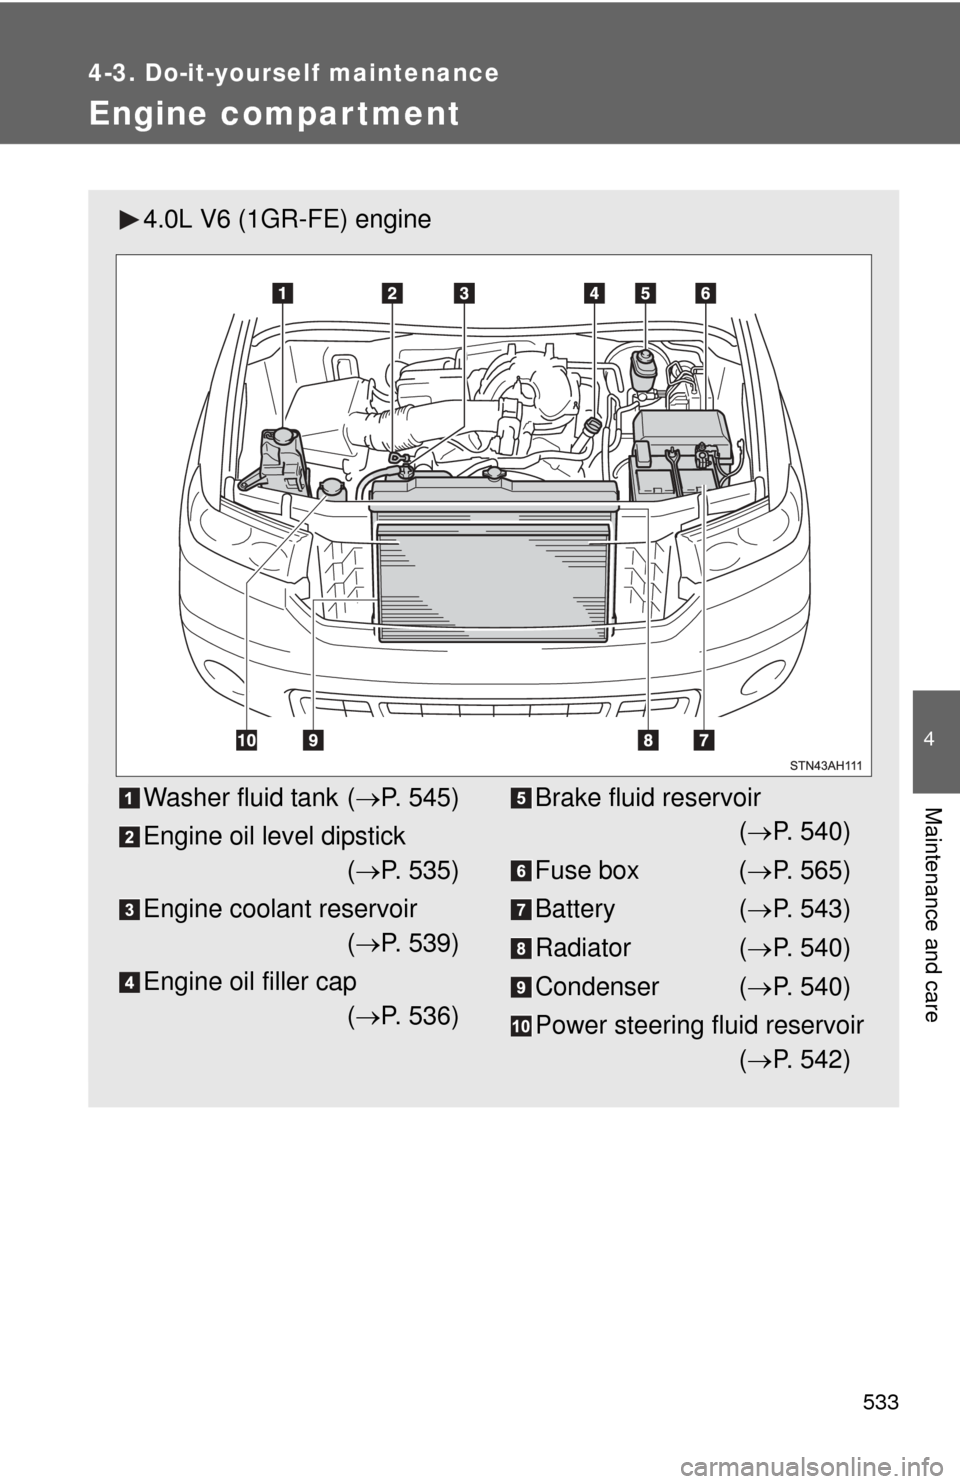 TOYOTA TUNDRA 2011 2.G Owners Manual 533
4-3. Do-it-yourself maintenance
4
Maintenance and care
Engine compar tment
4.0L V6 (1GR-FE) engine
Washer fluid tank (P. 545)
Engine oil level dipstick ( P. 535)
Engine coolant reservoir (�